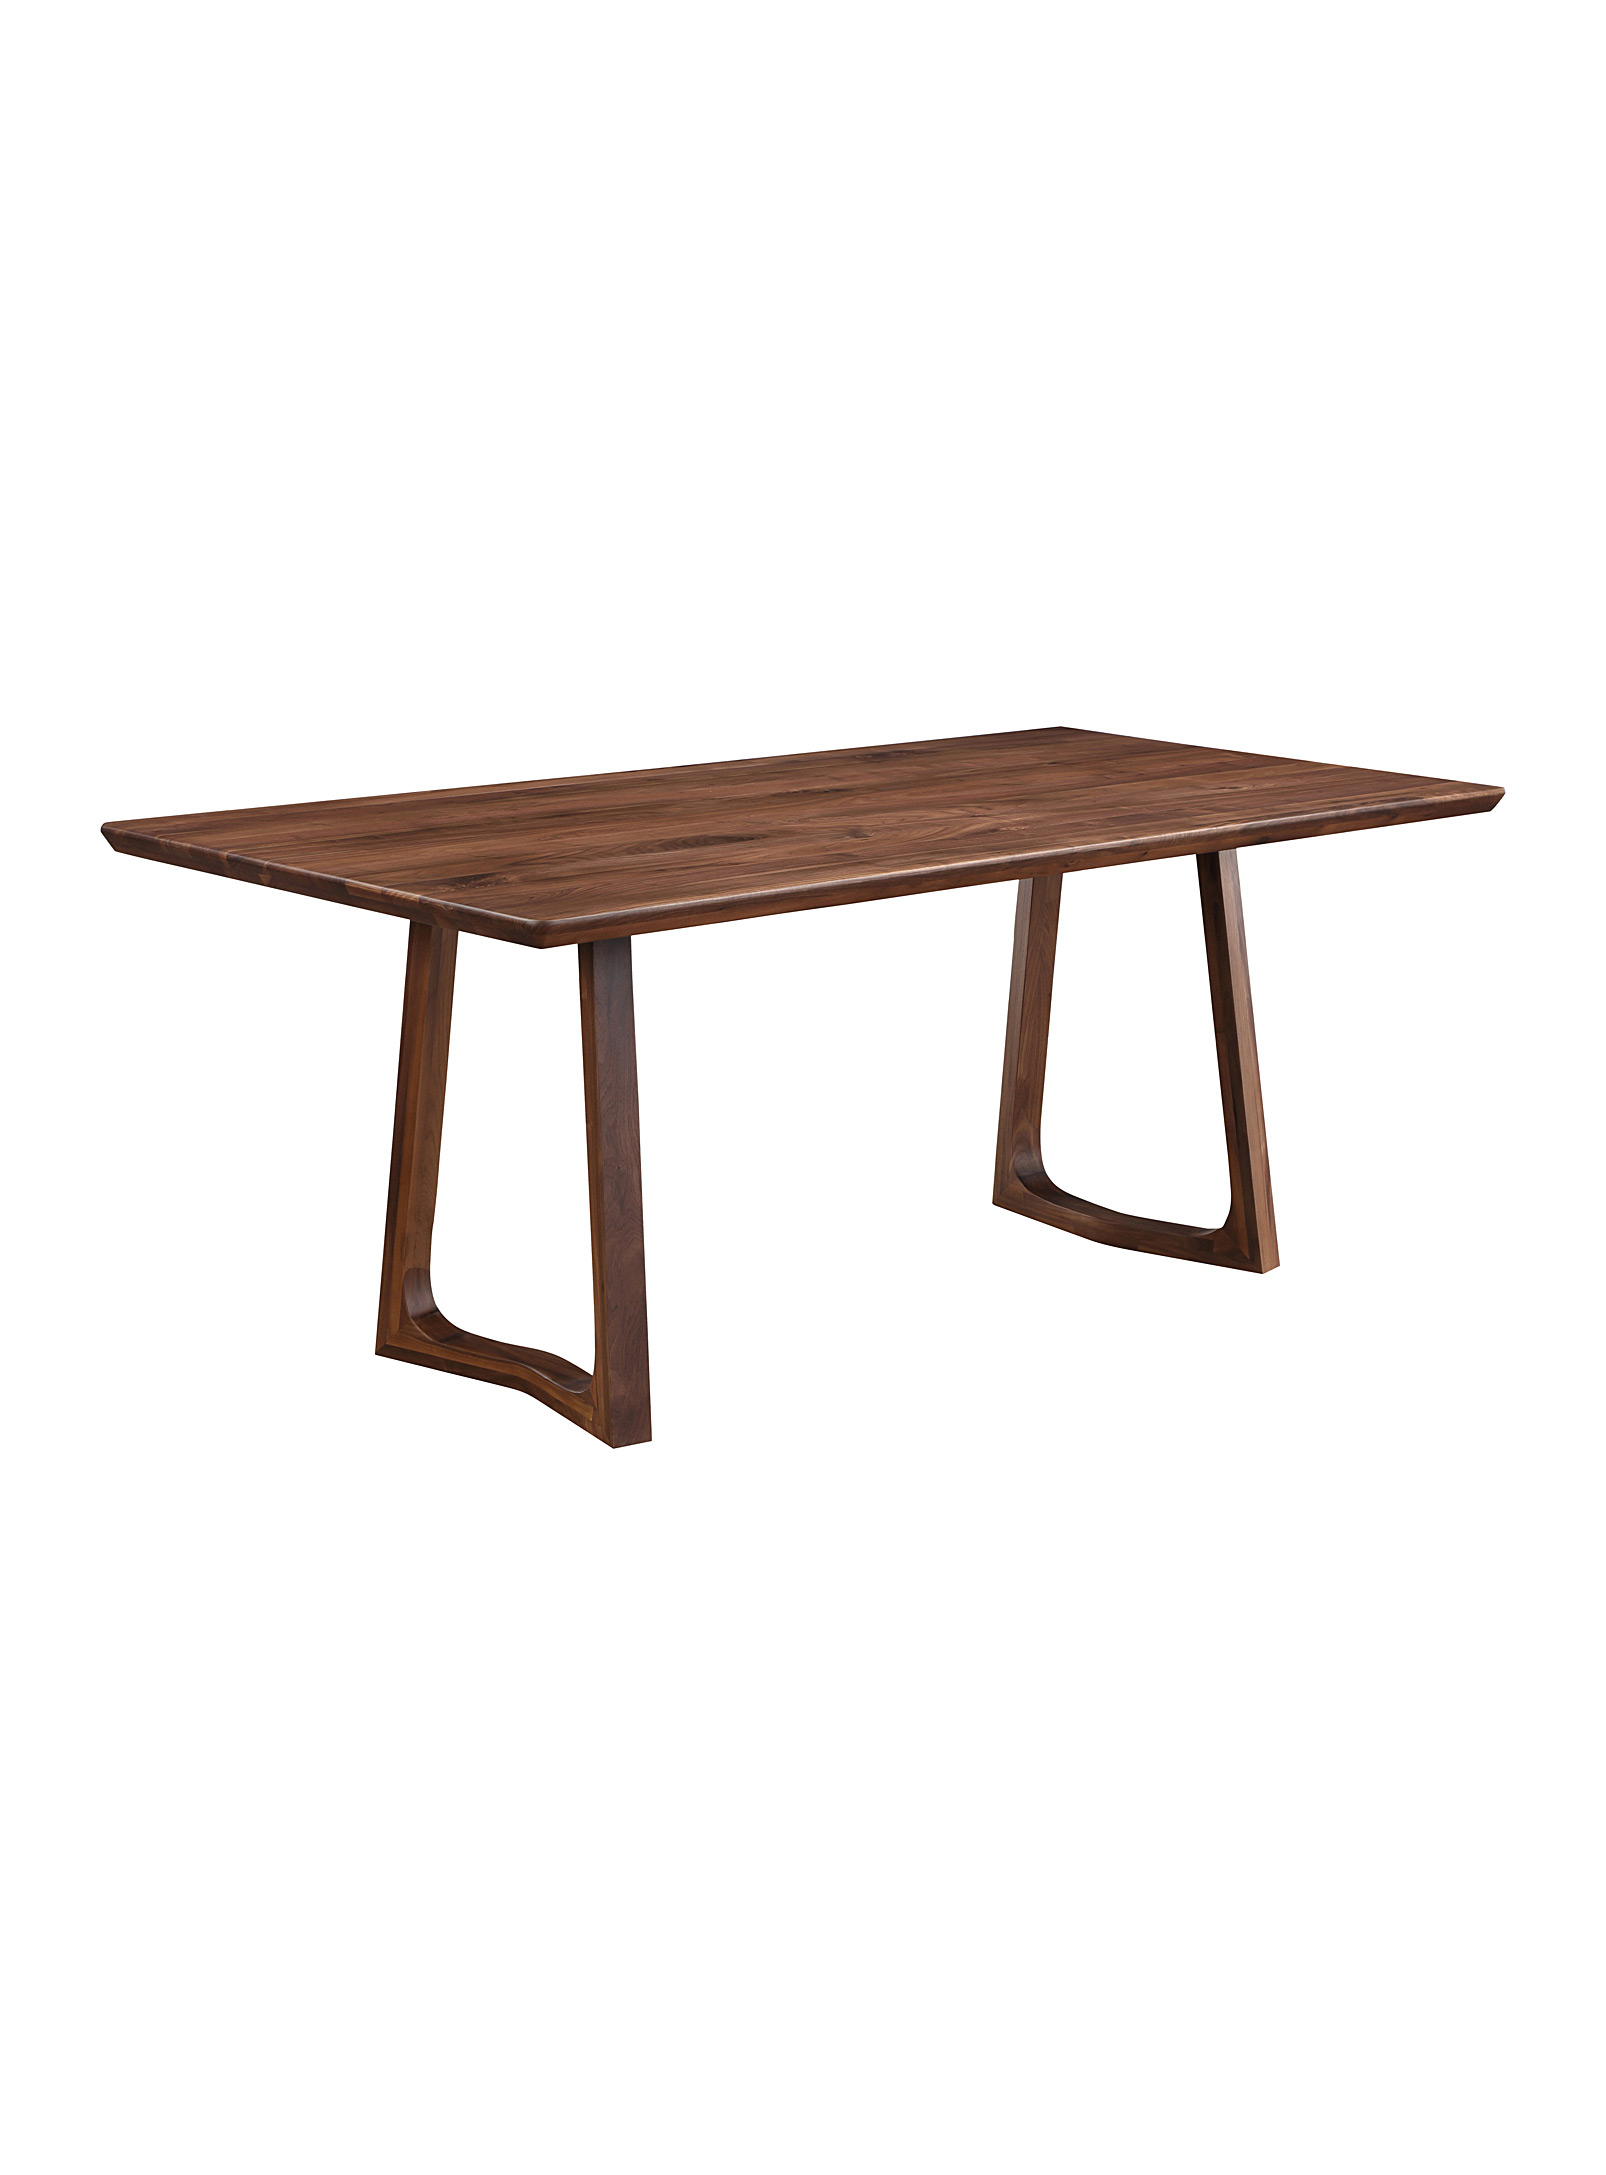 Moe's Home Collection - Walnut wood Silas rectangular dining table